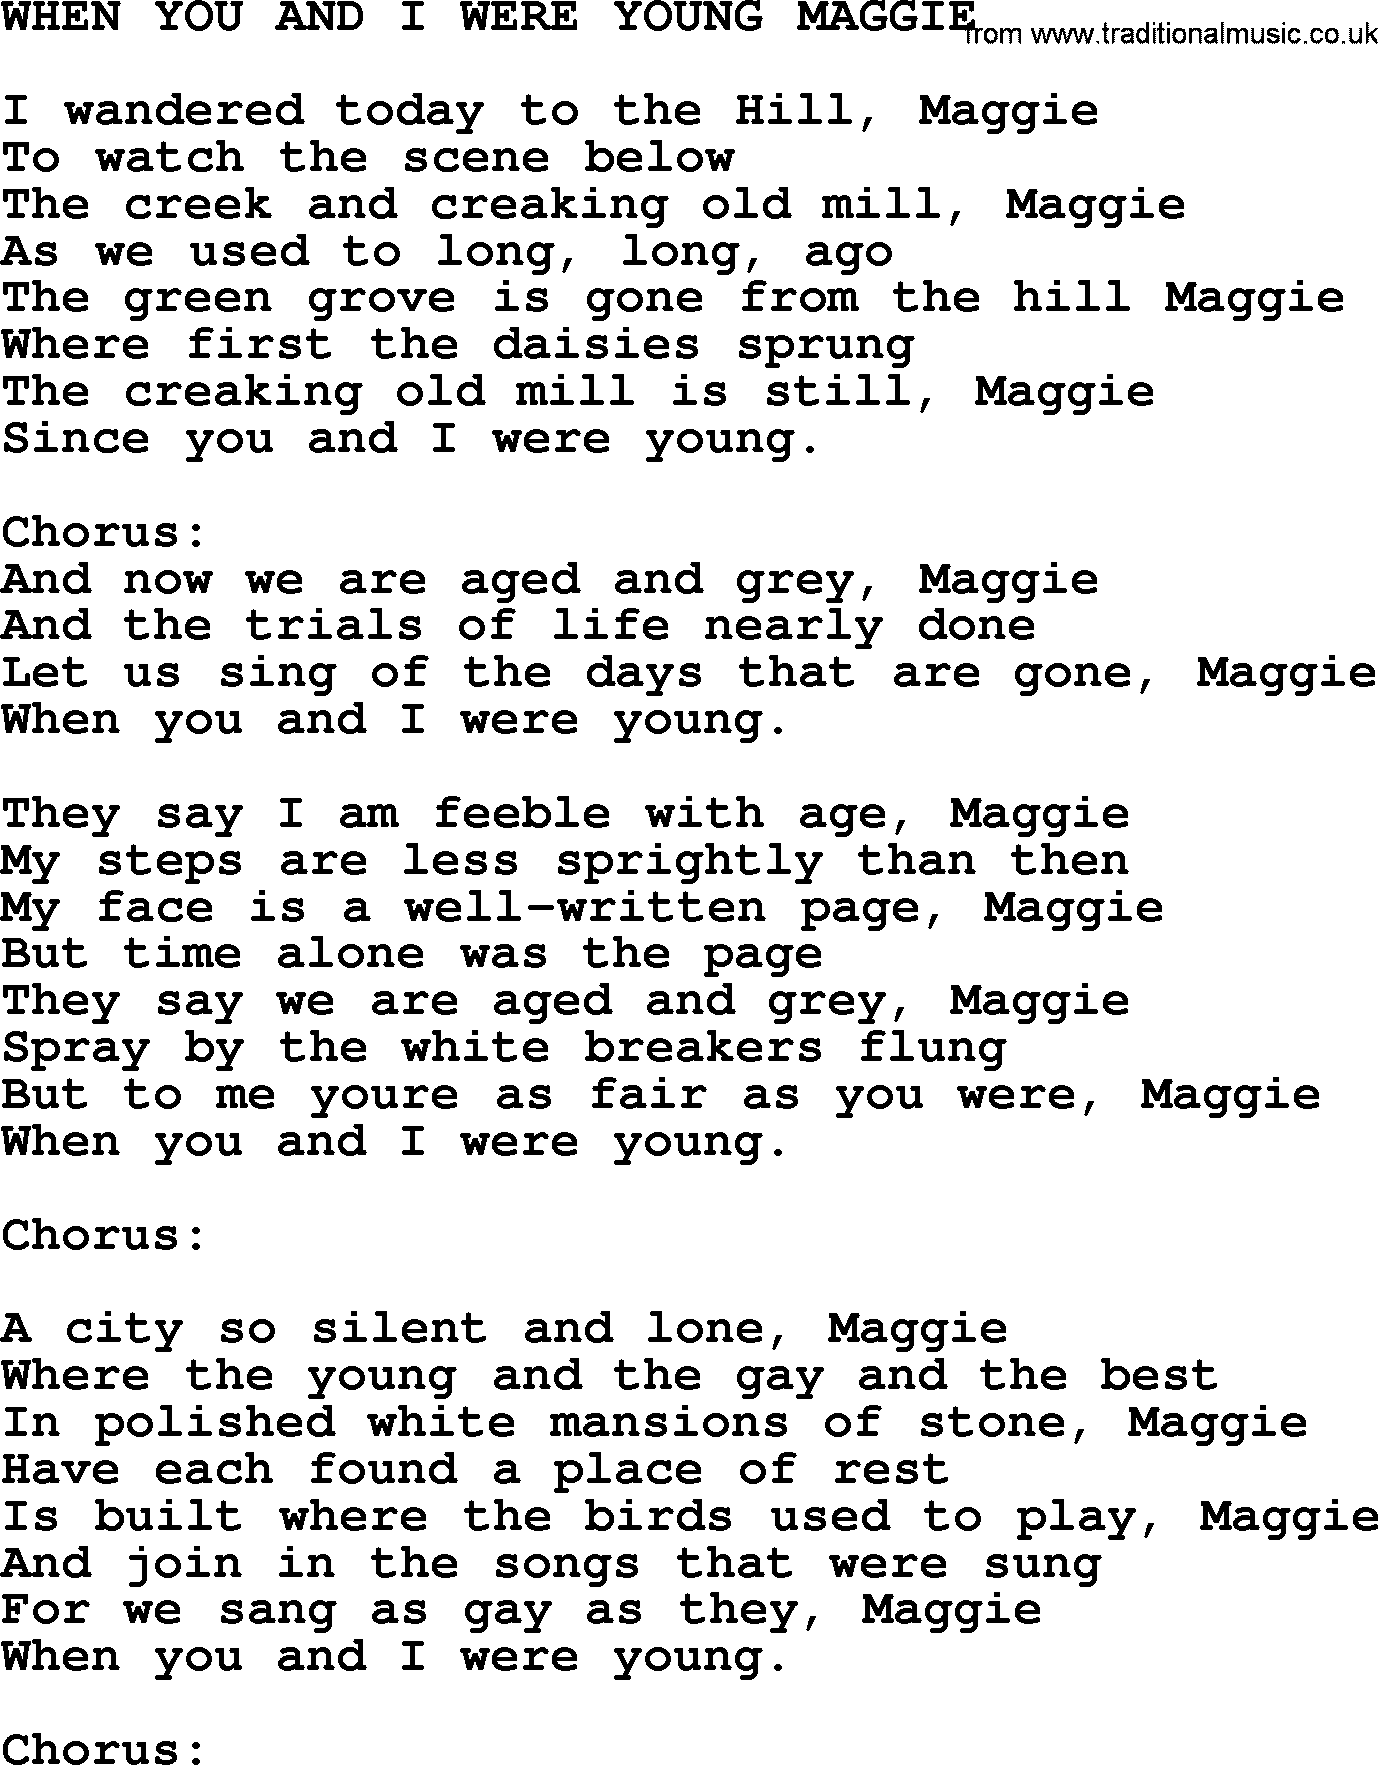 World War(WW1) One Song: When You And I Were Young Maggie, lyrics and PDF